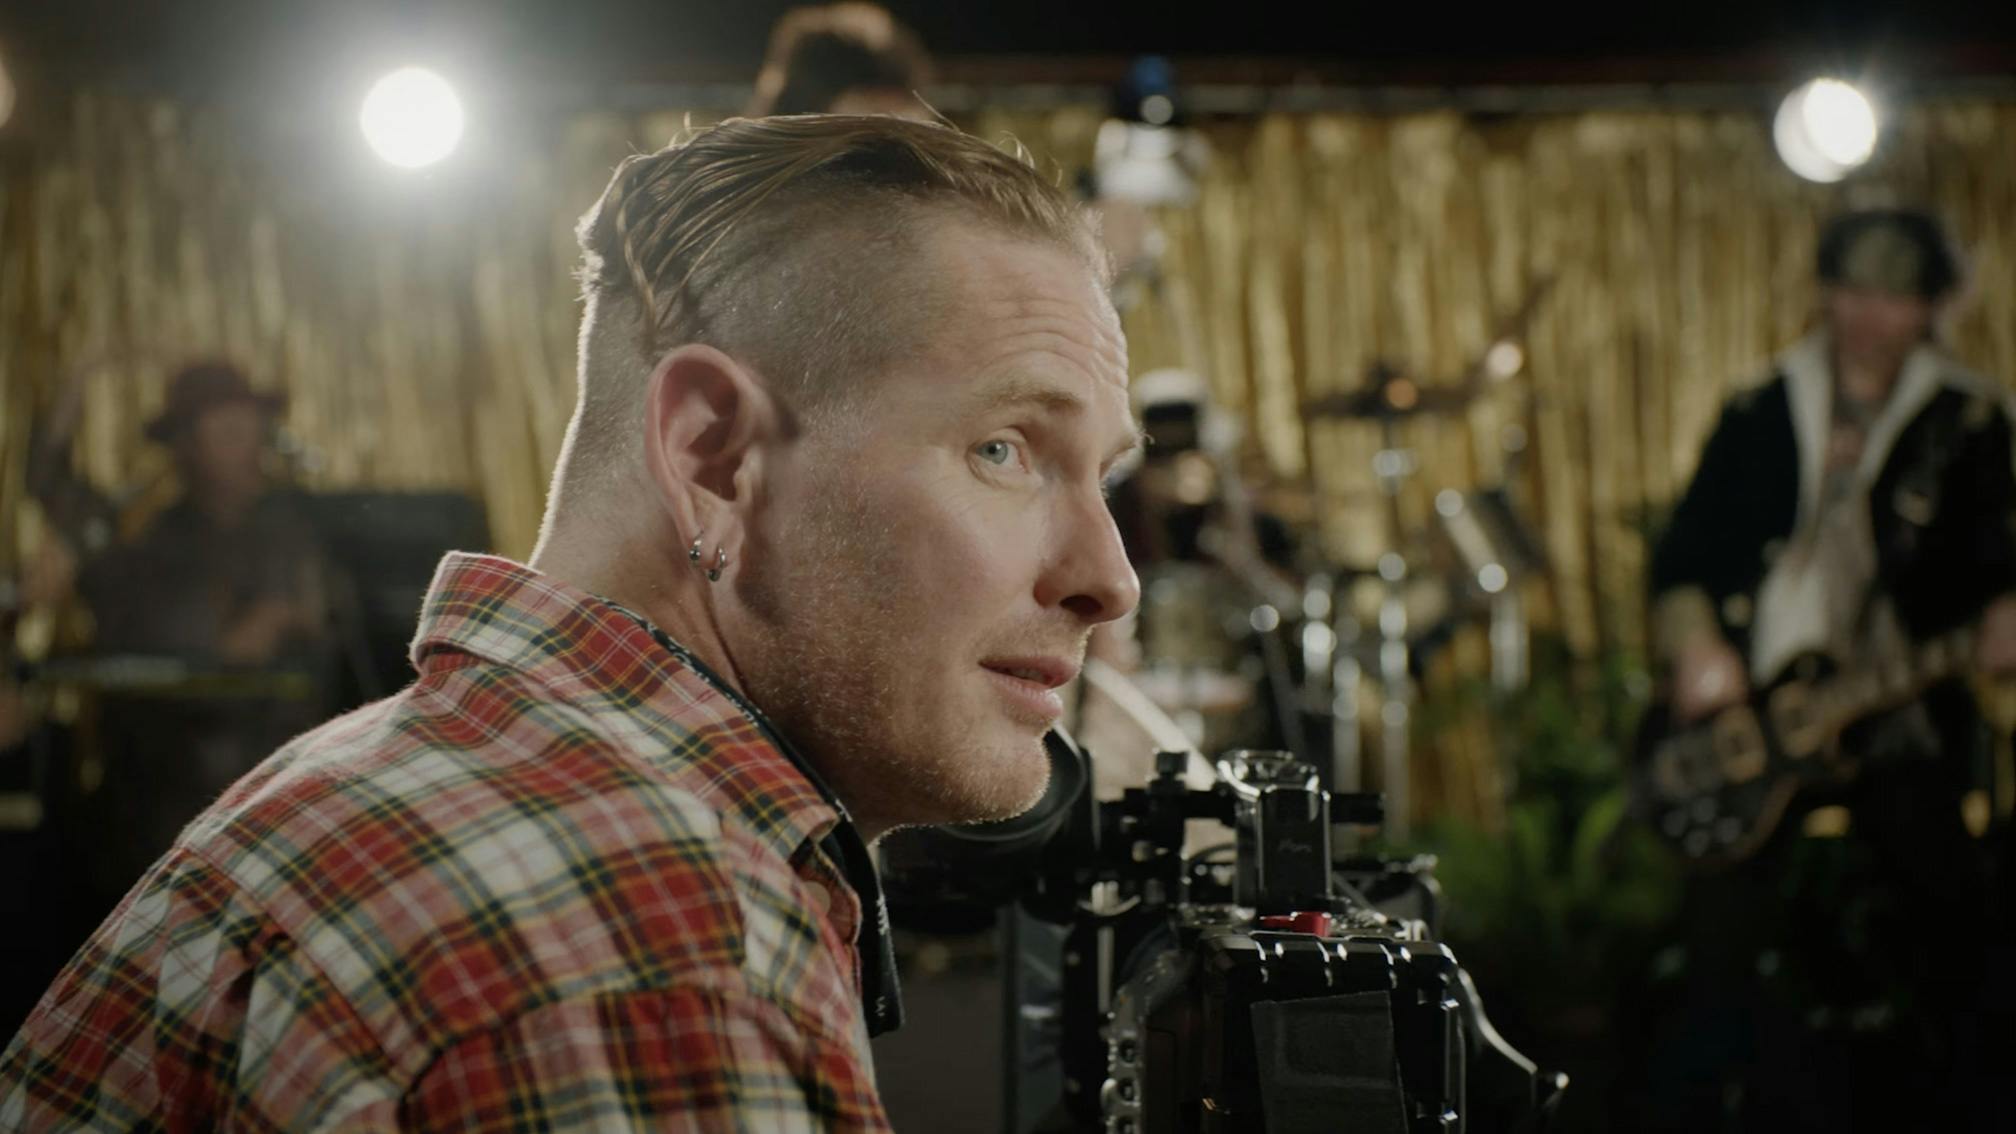 Corey Taylor recruits actor and musician pals for hilarious Samantha's Gone video